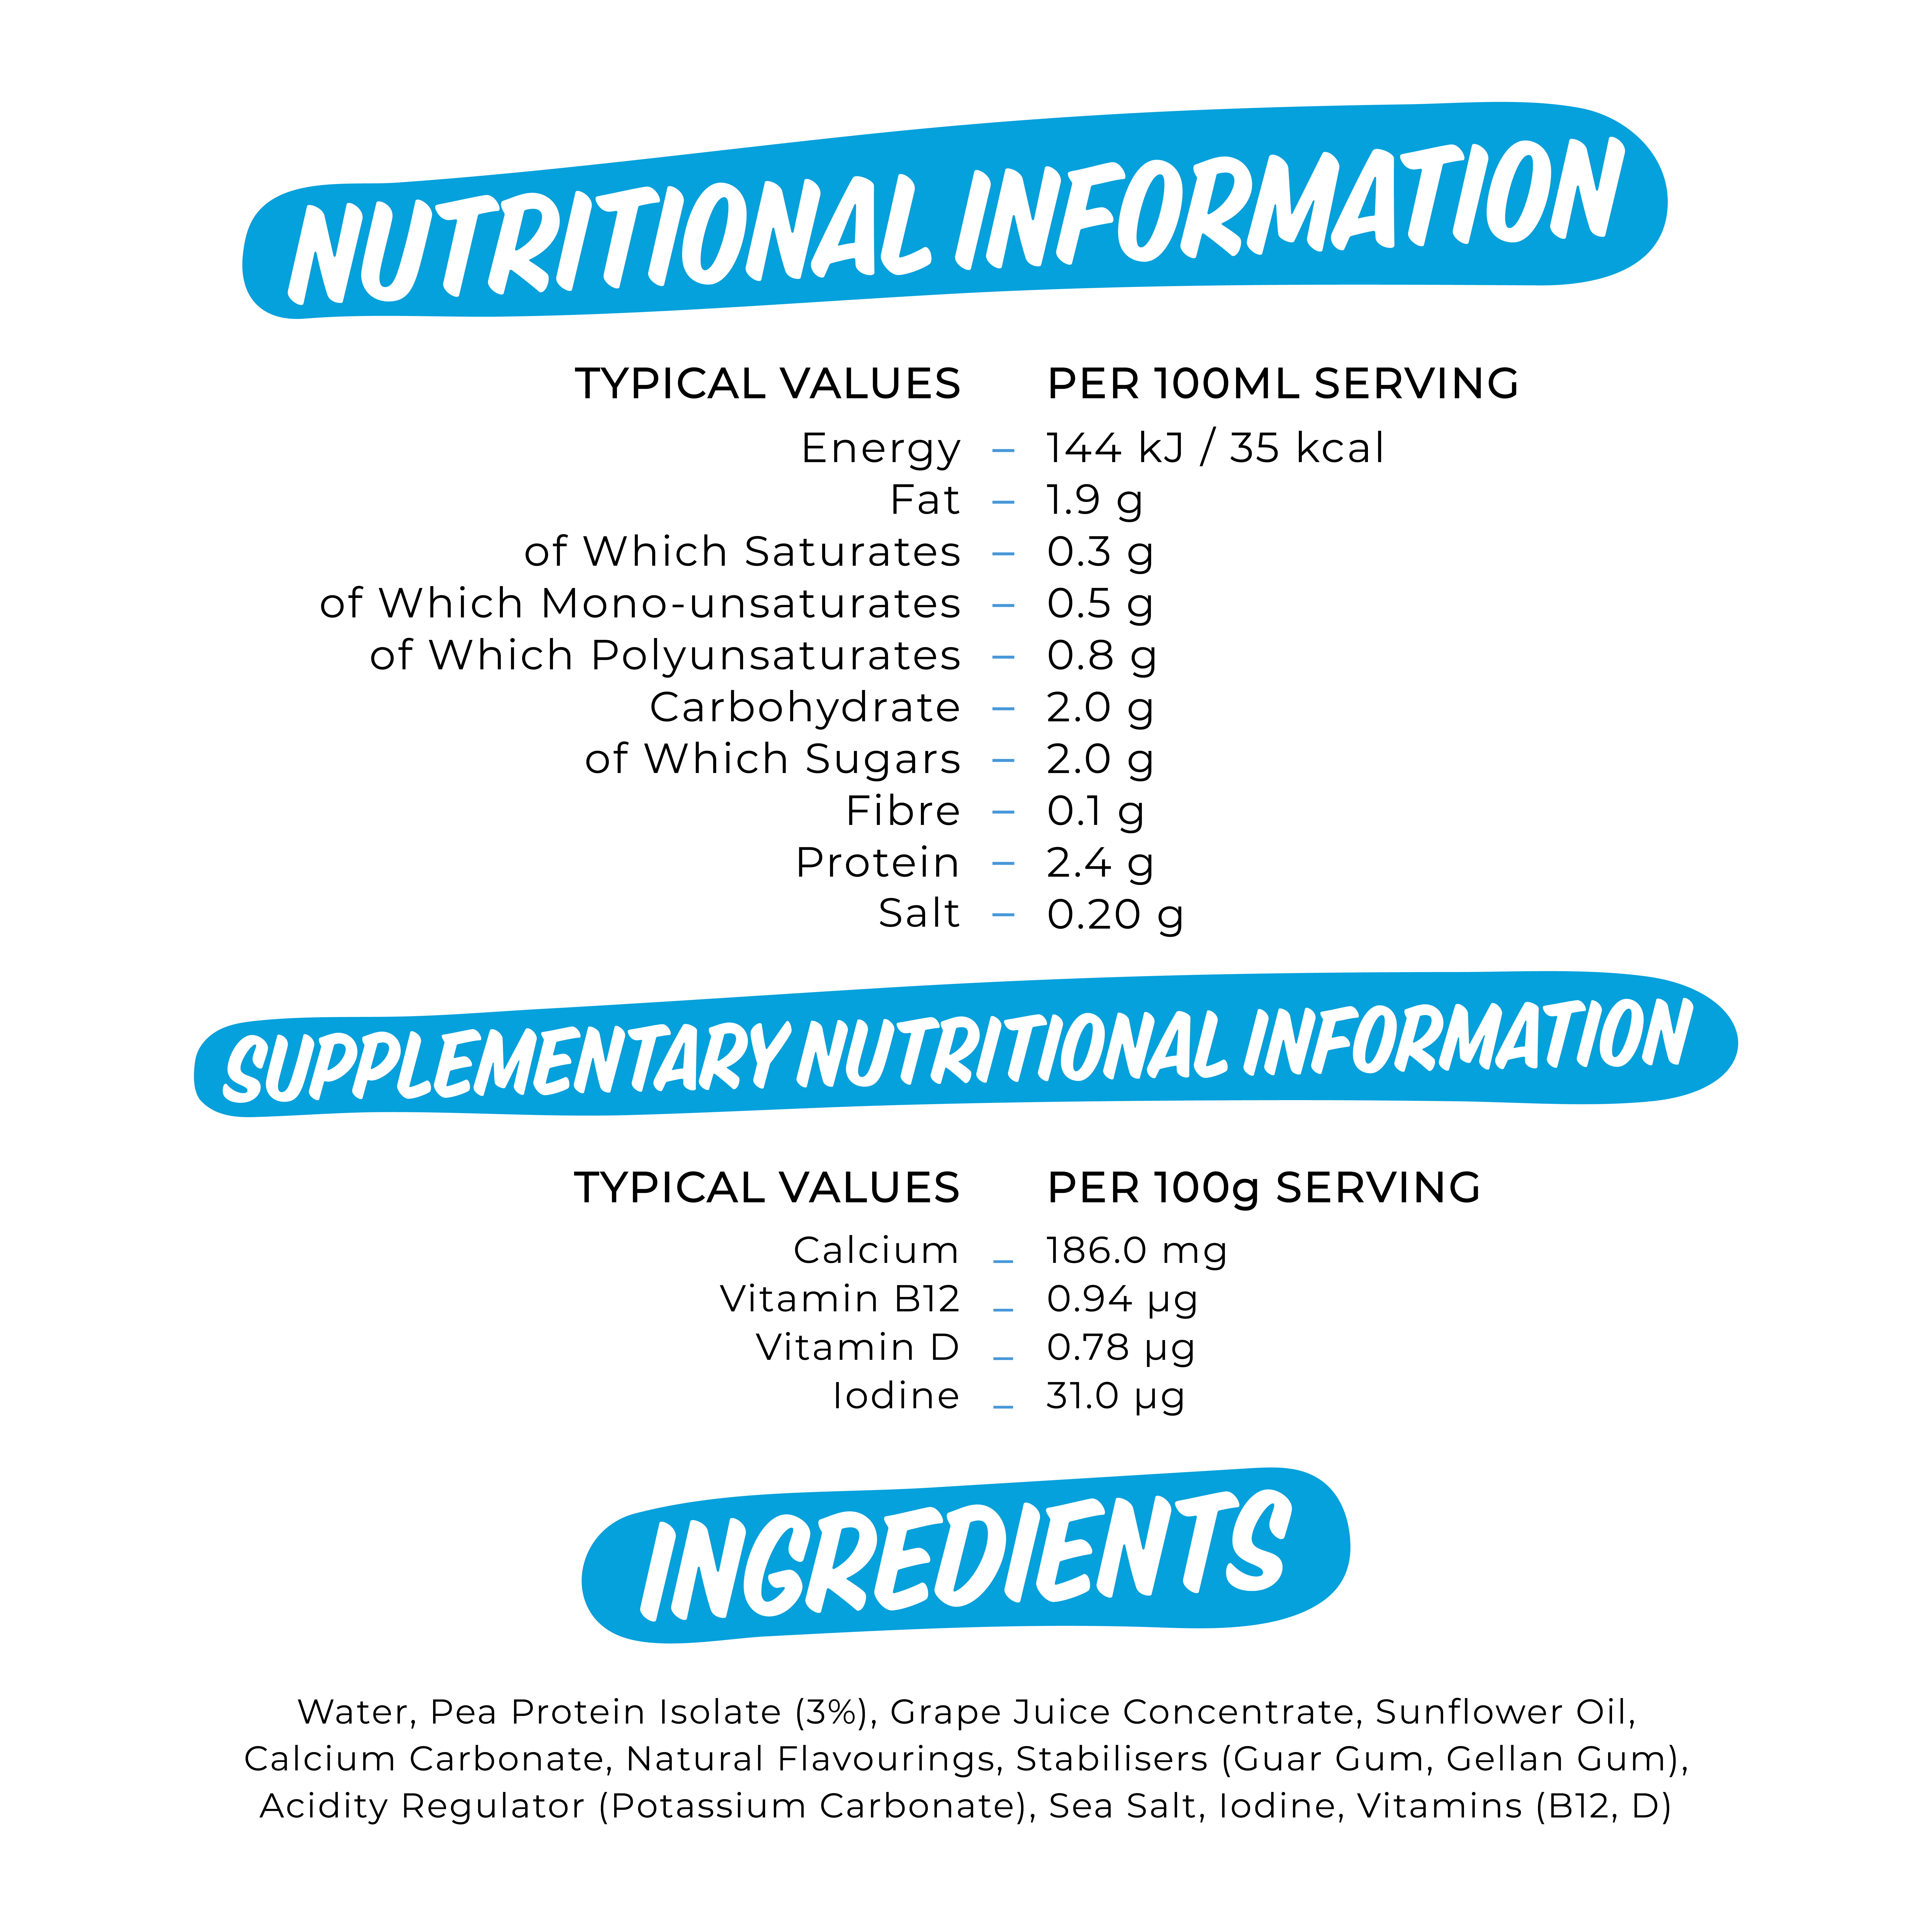 TYPICAL VALUES PER 100ML SERVING Energy 144 kJ /35 kcal Fat 1.9 g of Which Saturates 0.3 g of Which Mono-unsaturates 0.5 g of Which Polyunsaturates 0.8 g Carbohydrate 2.0 g of Which Sugars 2.0 g Fibre 0.1 g Protein 2.4 g Salt 0.20 g 
                                  gUPPLEMENTARY NUTRITIONAL INFORMATION 
                                  TYPICAL VALUES PER 100g SERVING Calcium 186.0 mg Vitamin B12 0.94 pg Vitamin D 0.78 pg Iodine 31.0 pg 

                                  Water, Pea Protein Isolate (3%), Grape Juice Concentrate, Sunflower Oil, Calcium Carbonate, Natural Flavourings, Stabilisers (Guar Gum, Gellan Gum), Acidity Regulator (Potassium Carbonate), Sea Salt, Iodine, Vitamins (B12, D) 
                                  